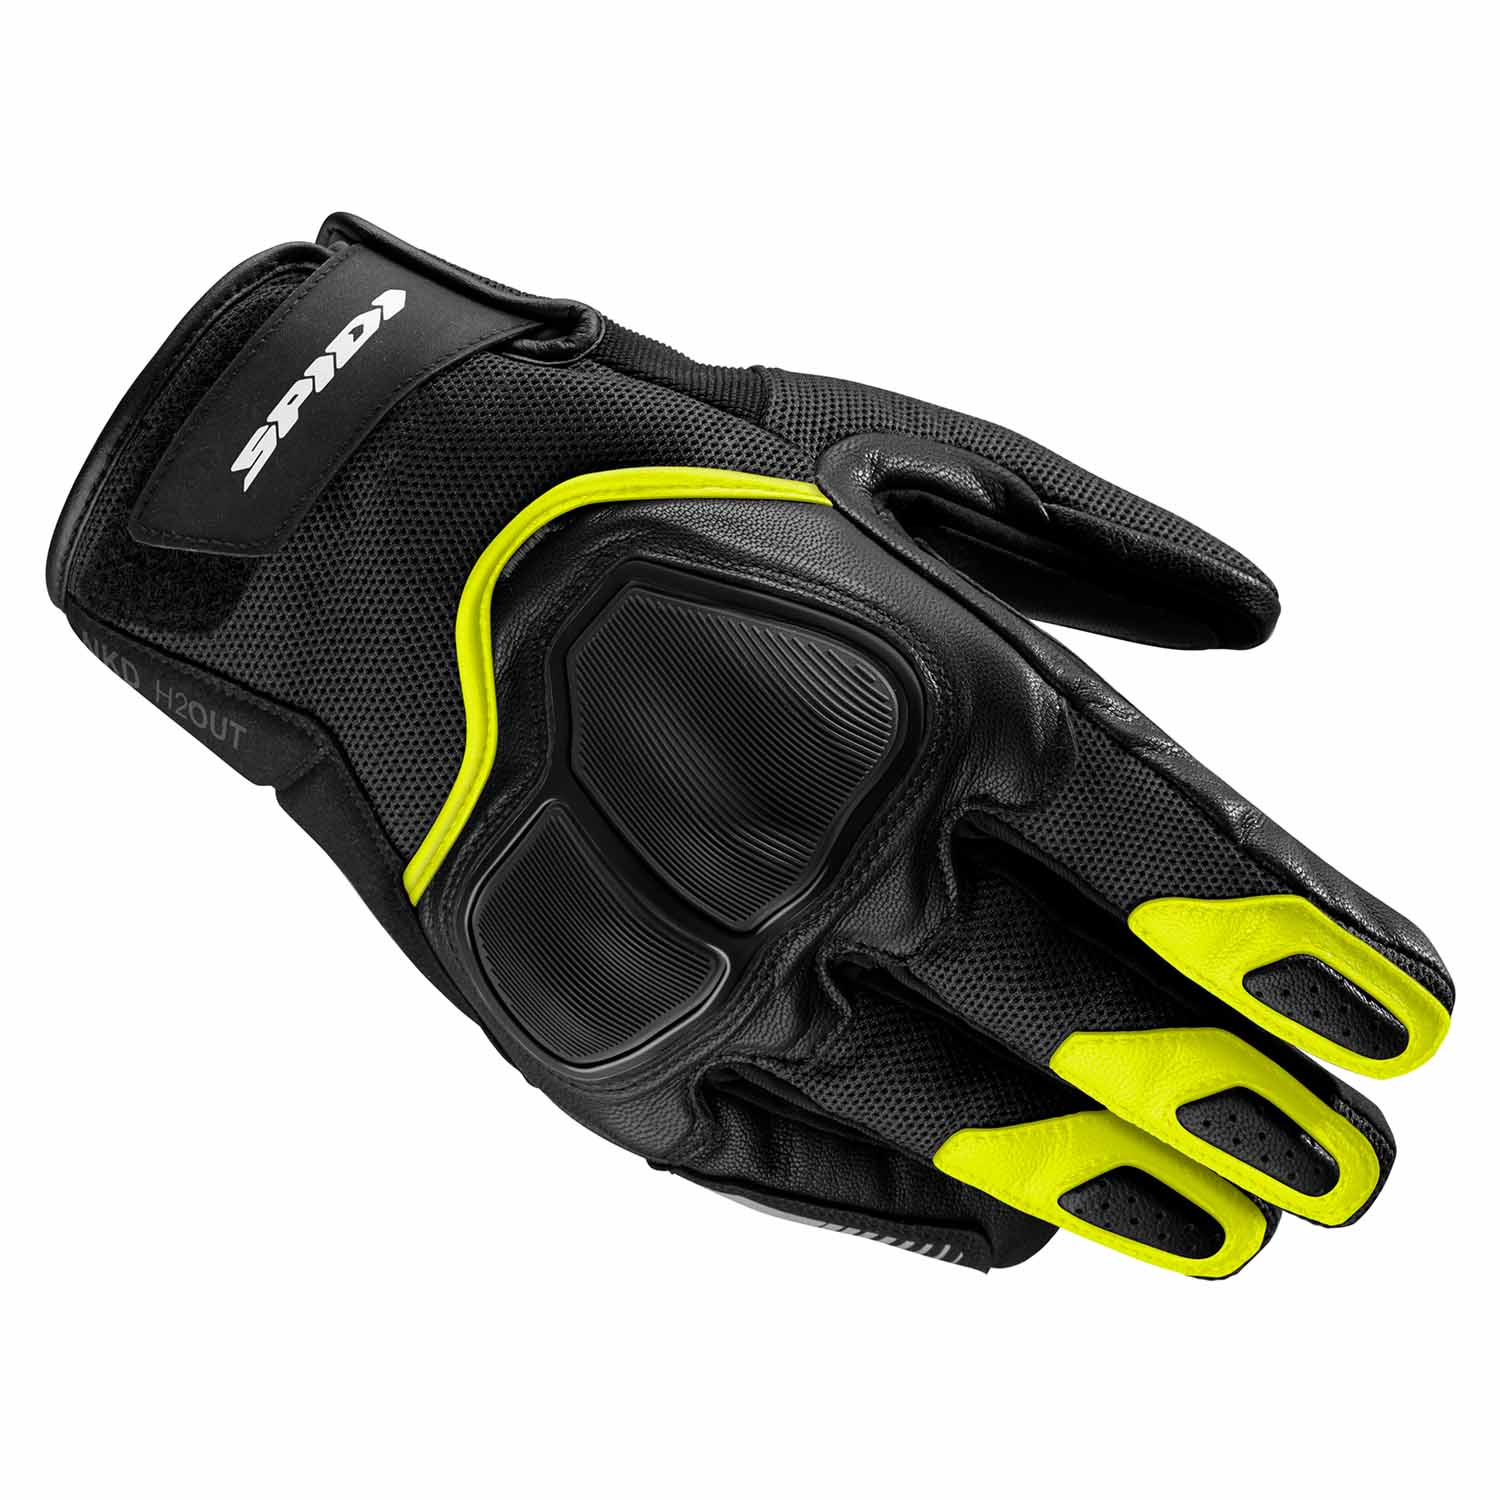 Image of Spidi NKD H2OUT Gloves Yellow Fluo Size M ID 8030161496710